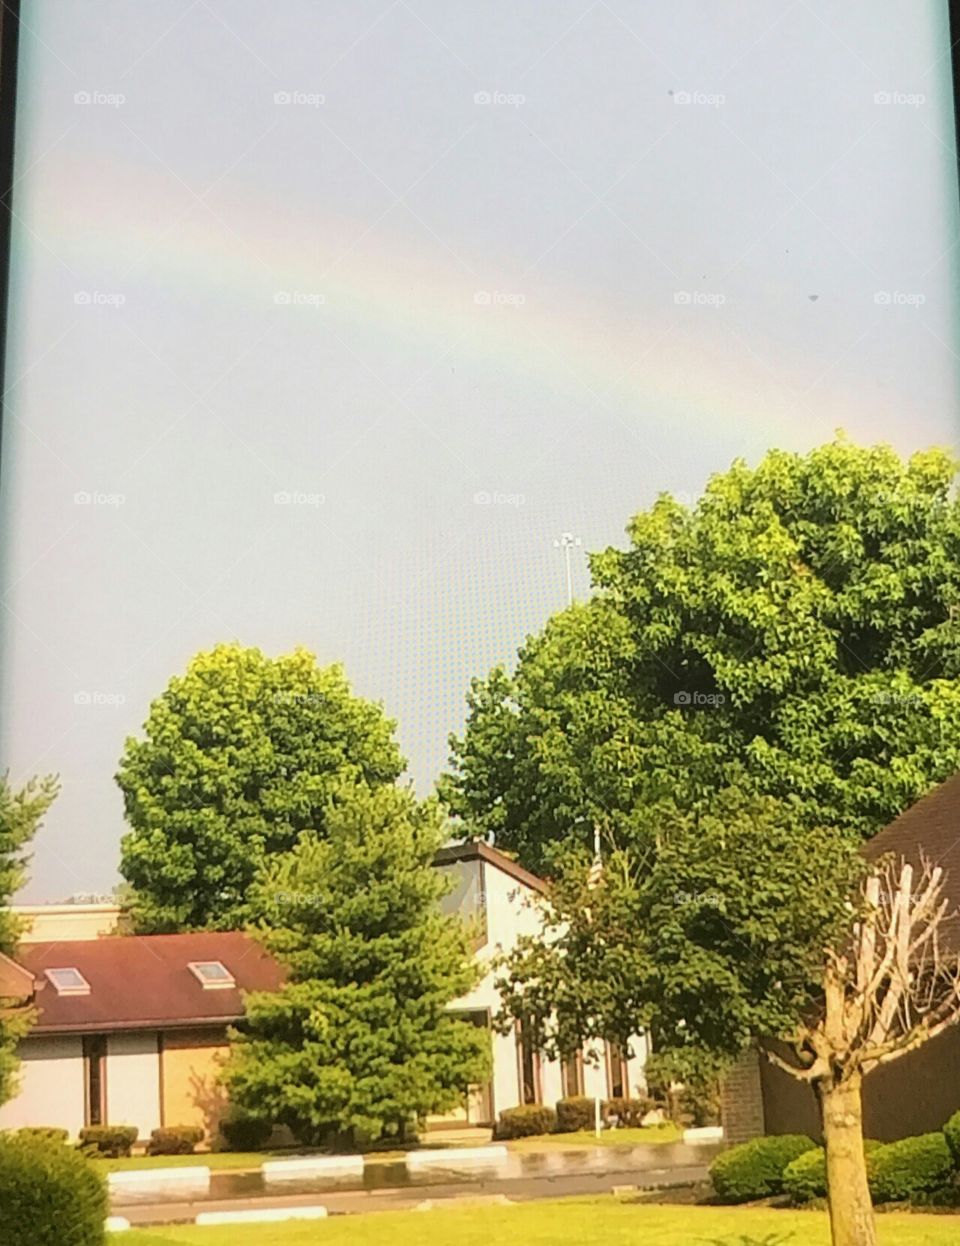 rainbow After the Storm